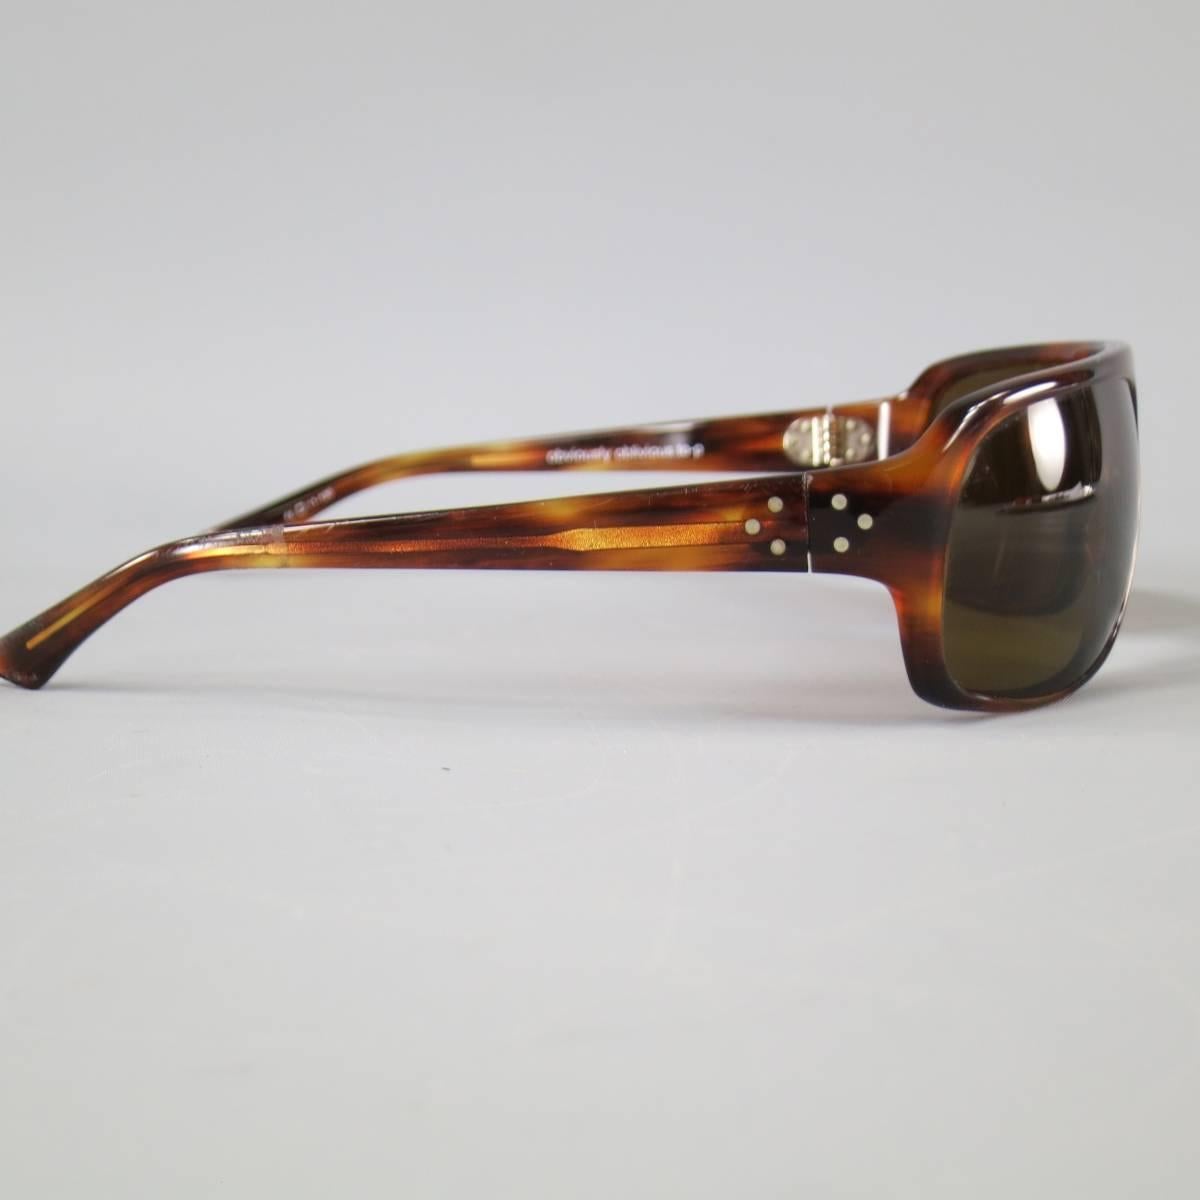 BLINDE Sunglasses consists of acetate material in a tortoiseshell color tone. Designed in a sleek rectangular shape, tan tortoiseshell pattern throughout lens and temples.
Designed by Richard Walker. Comes with original casing. Handmade in Japan.
